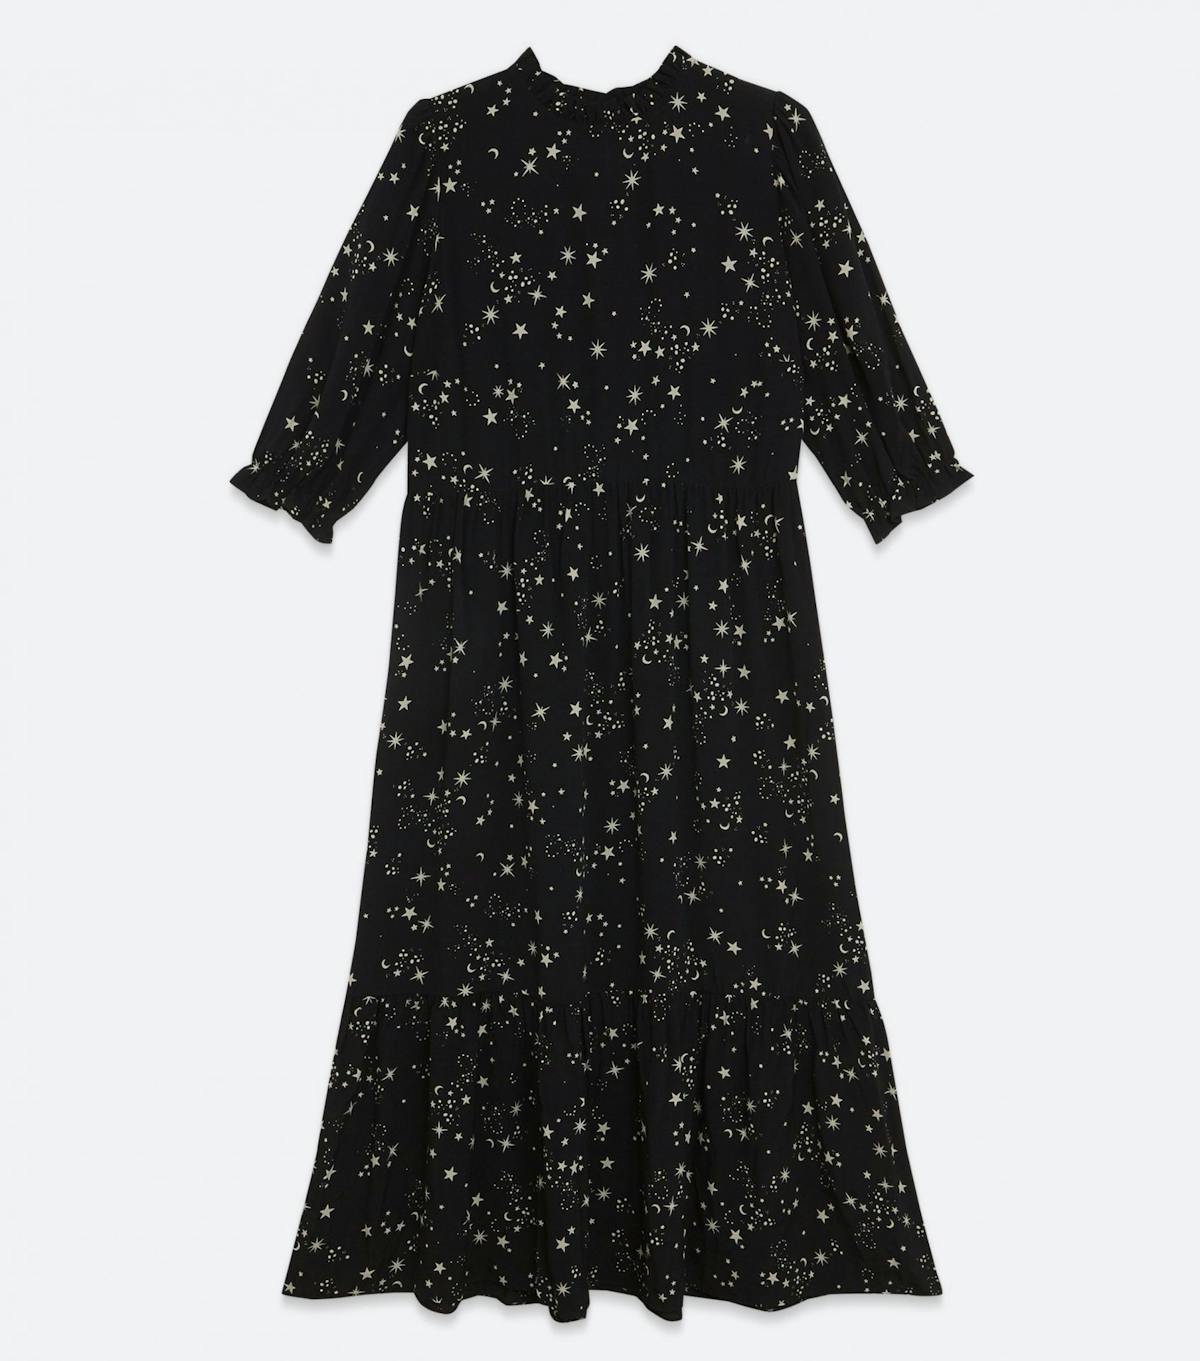 Best dresses for Christmas day: New Look star print dress